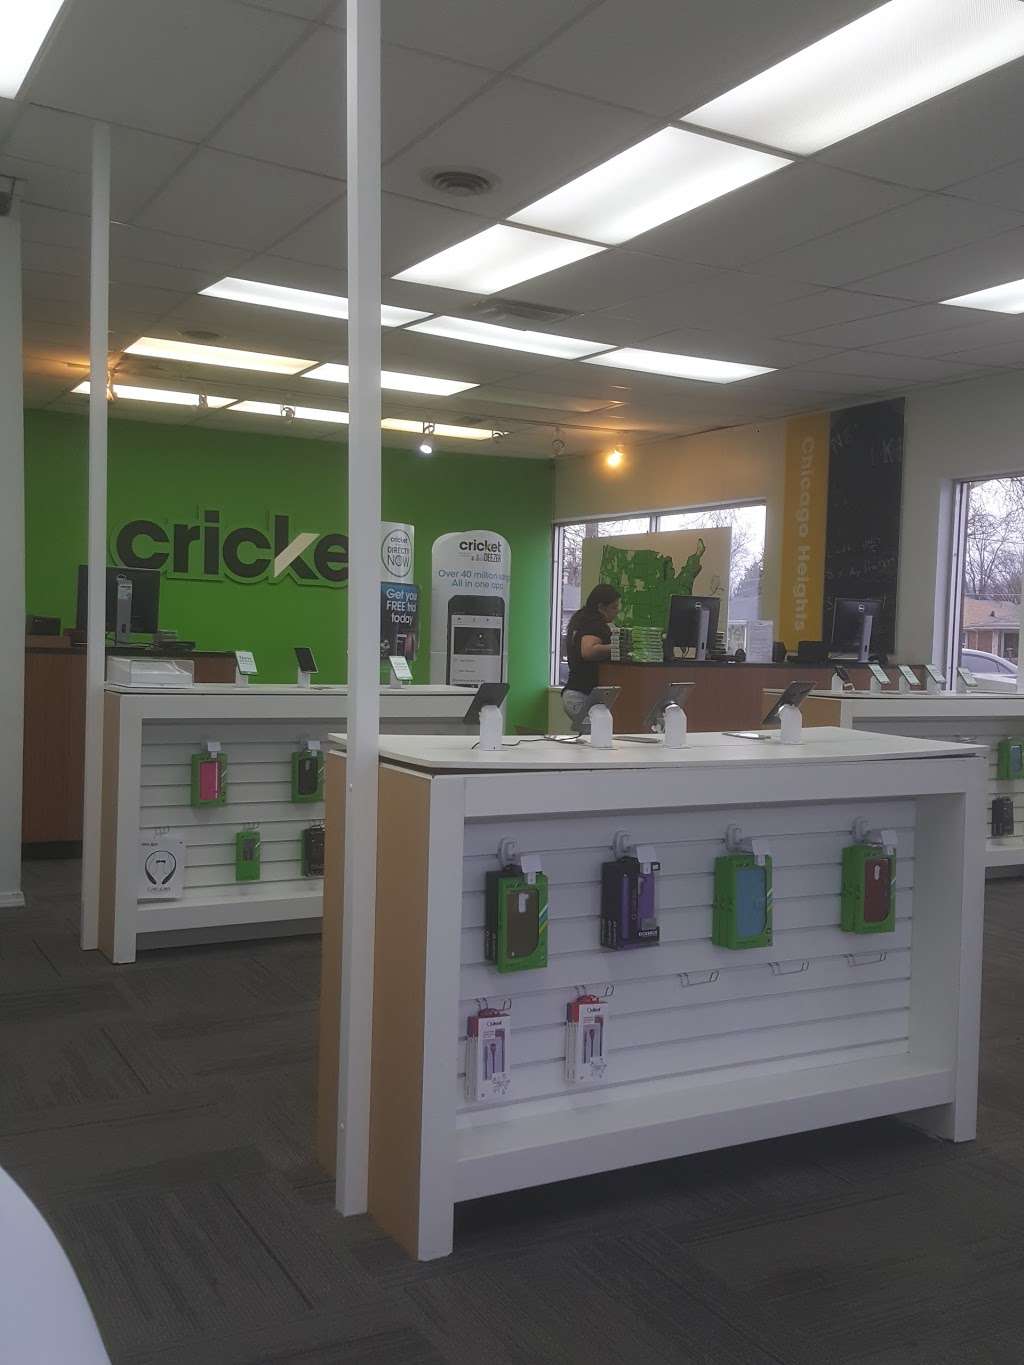 Cricket Wireless Authorized Retailer | 345 W 14th St, Chicago Heights, IL 60411 | Phone: (708) 755-2900